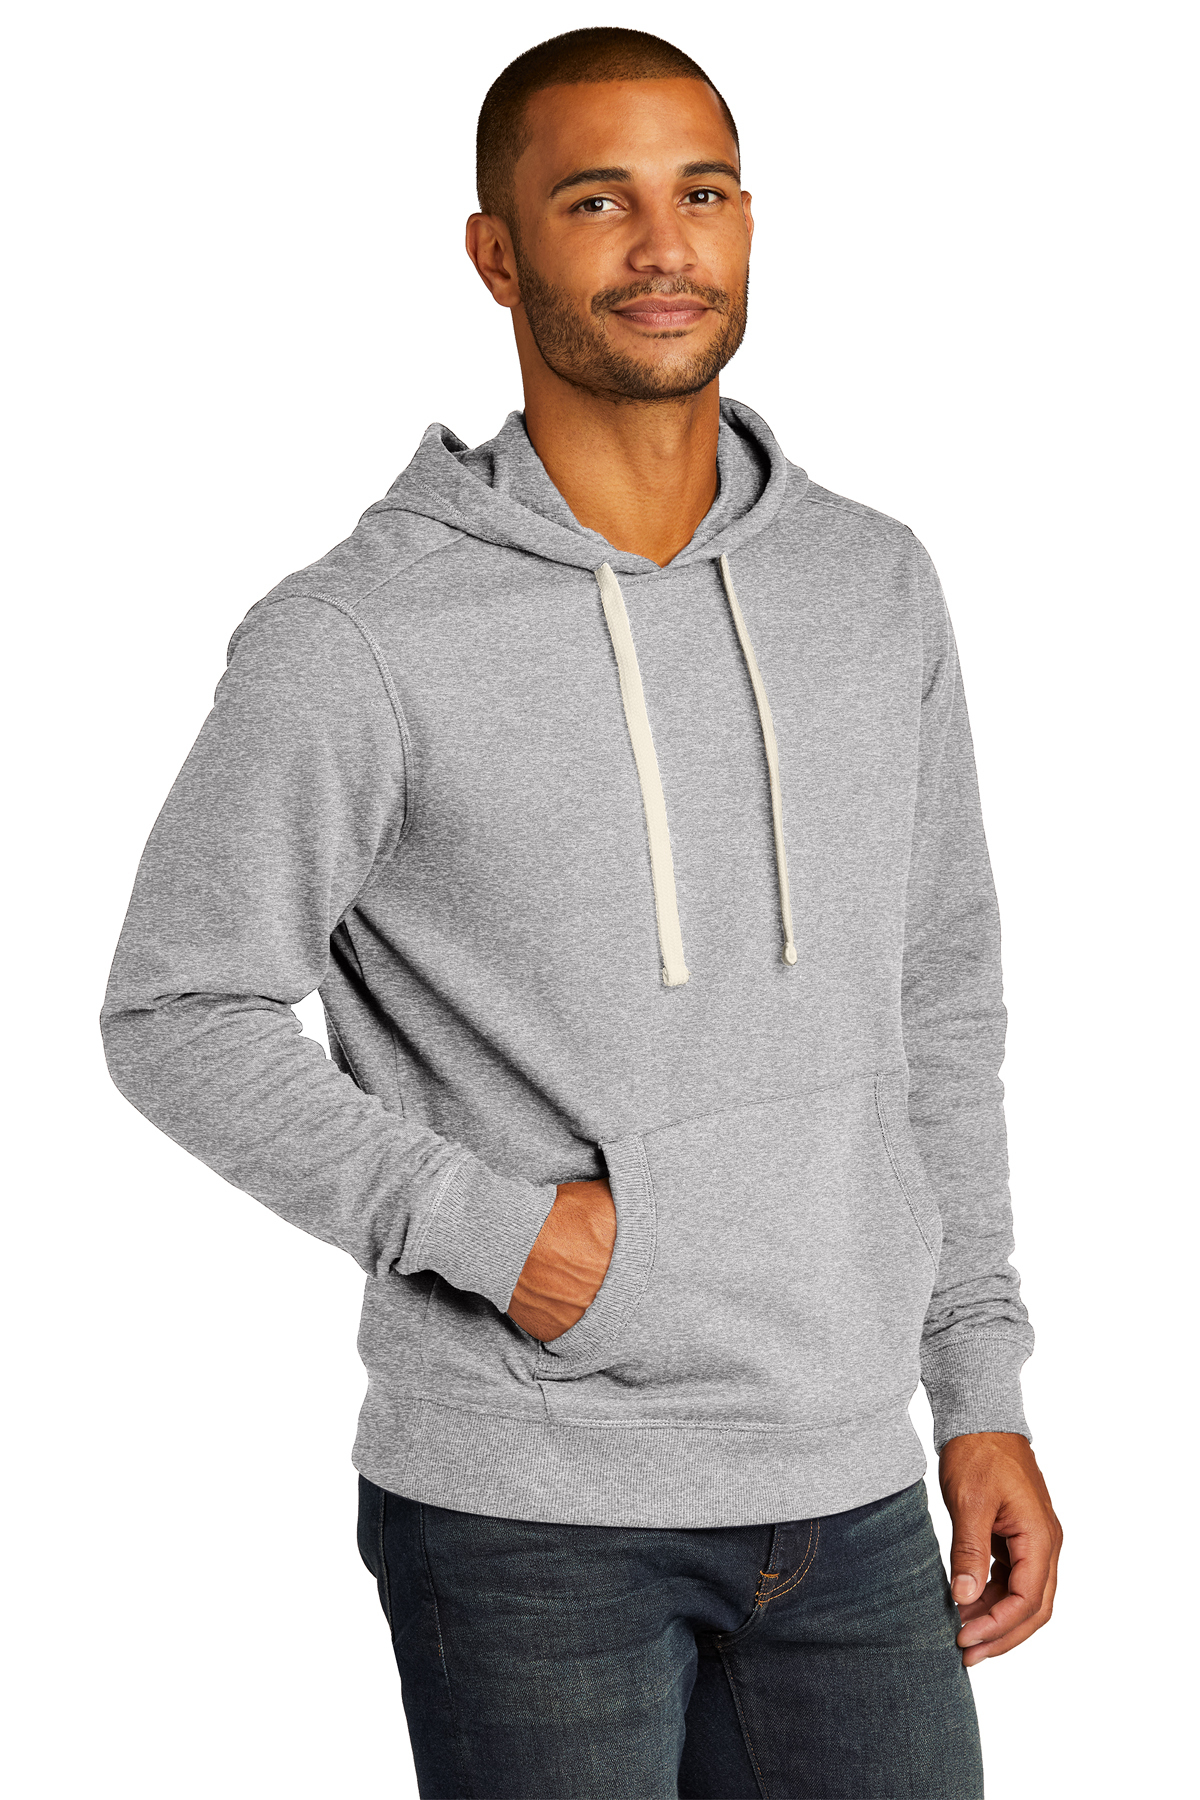 District Re-Fleece Hoodie | Product | District